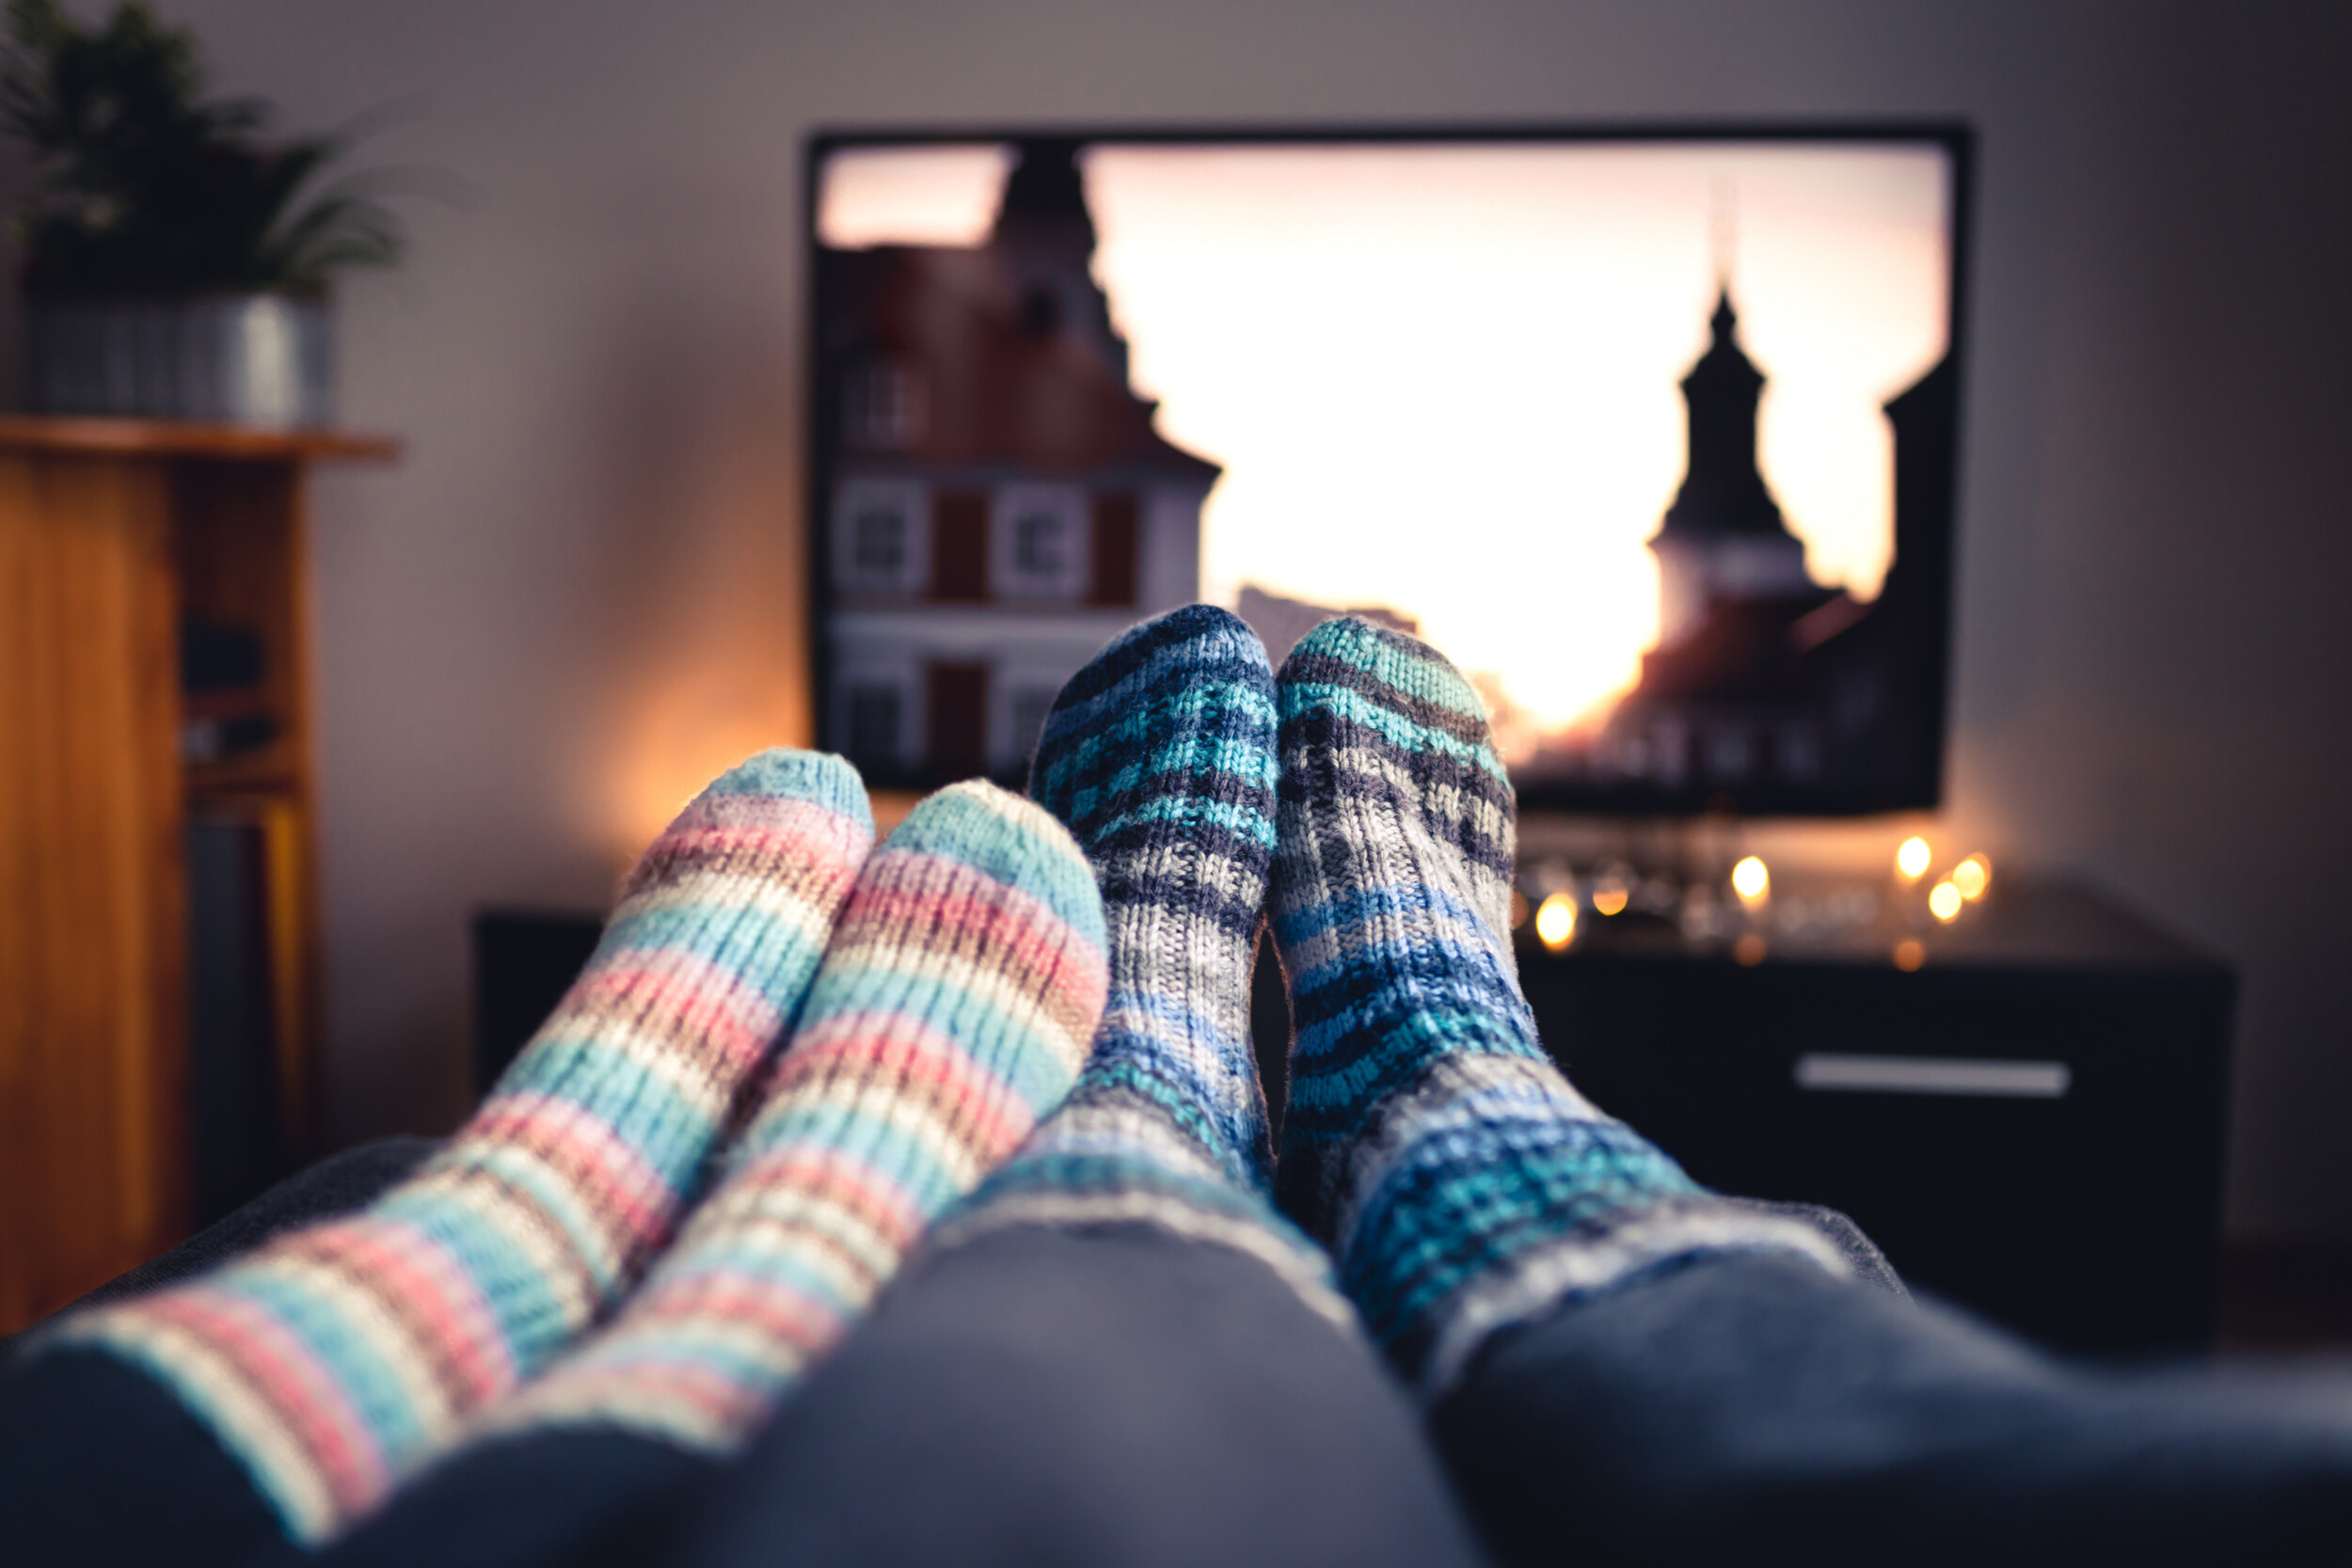 A couple watching TV with their feet up.